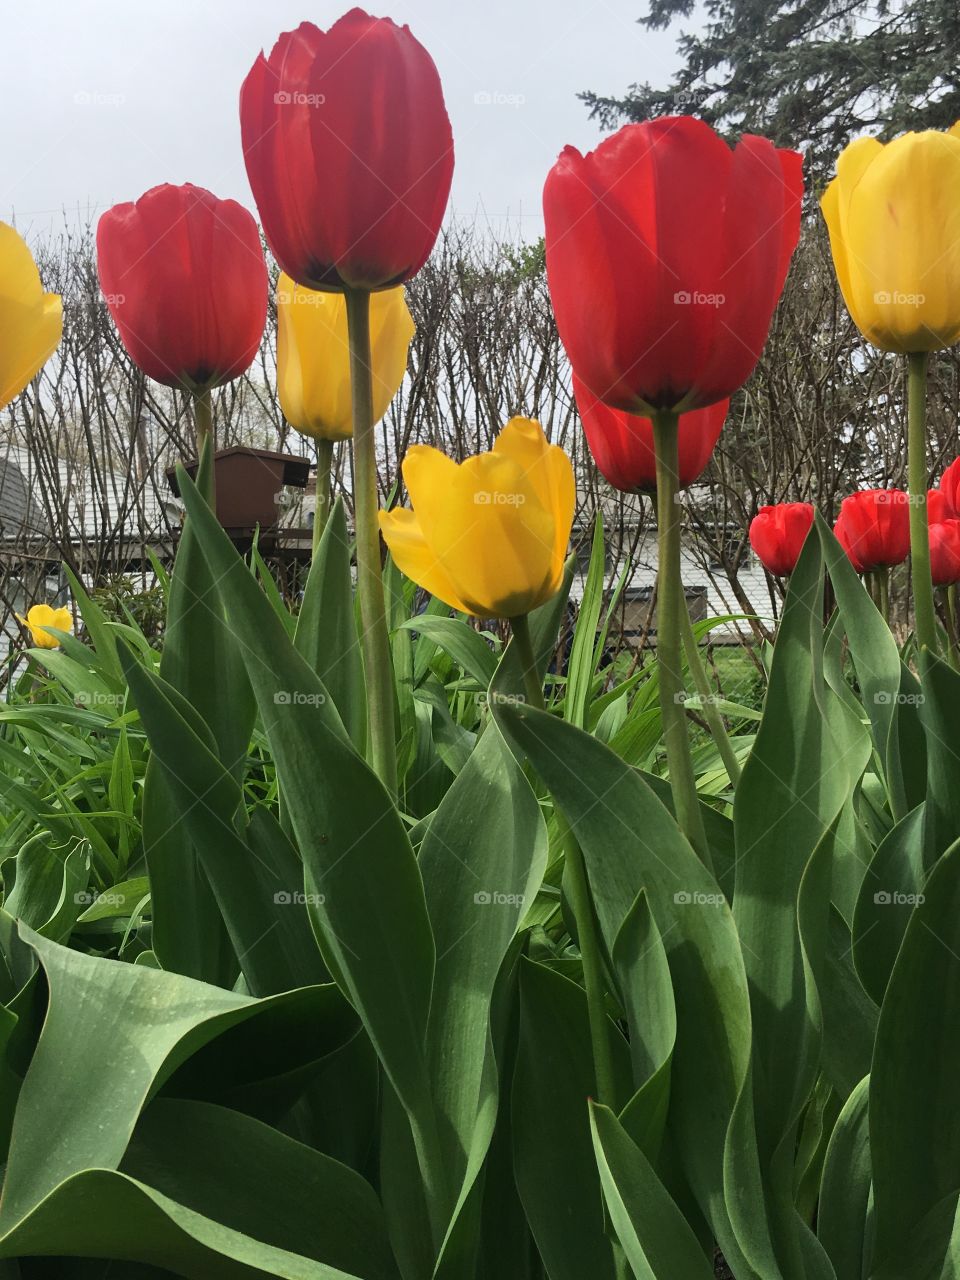 Bright yellow and red tulip garden.